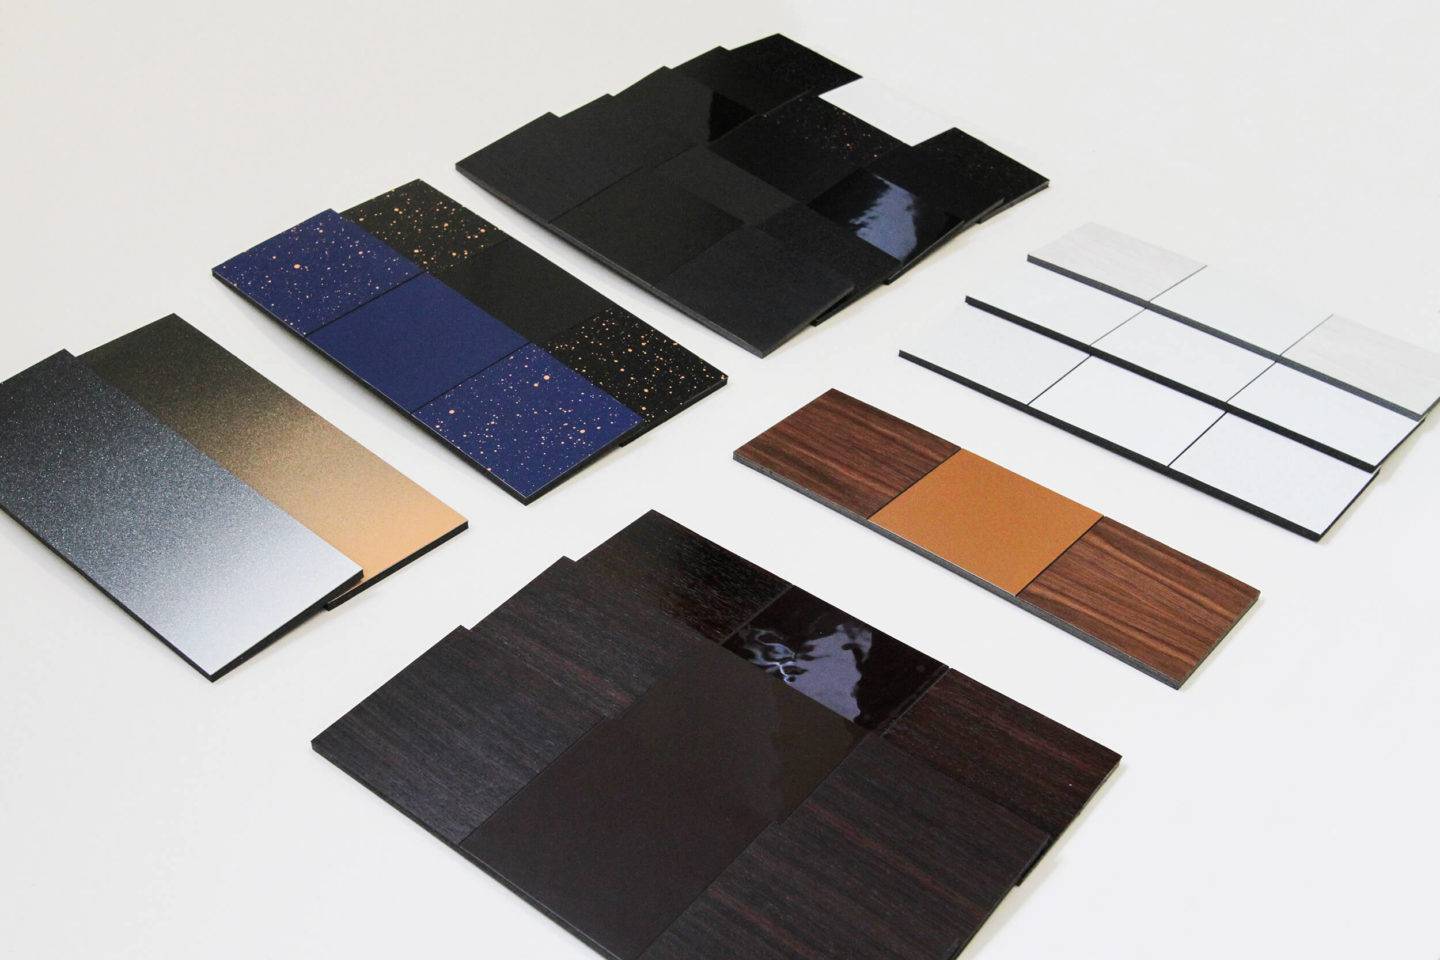 A selection of material samples in different colours and finishes